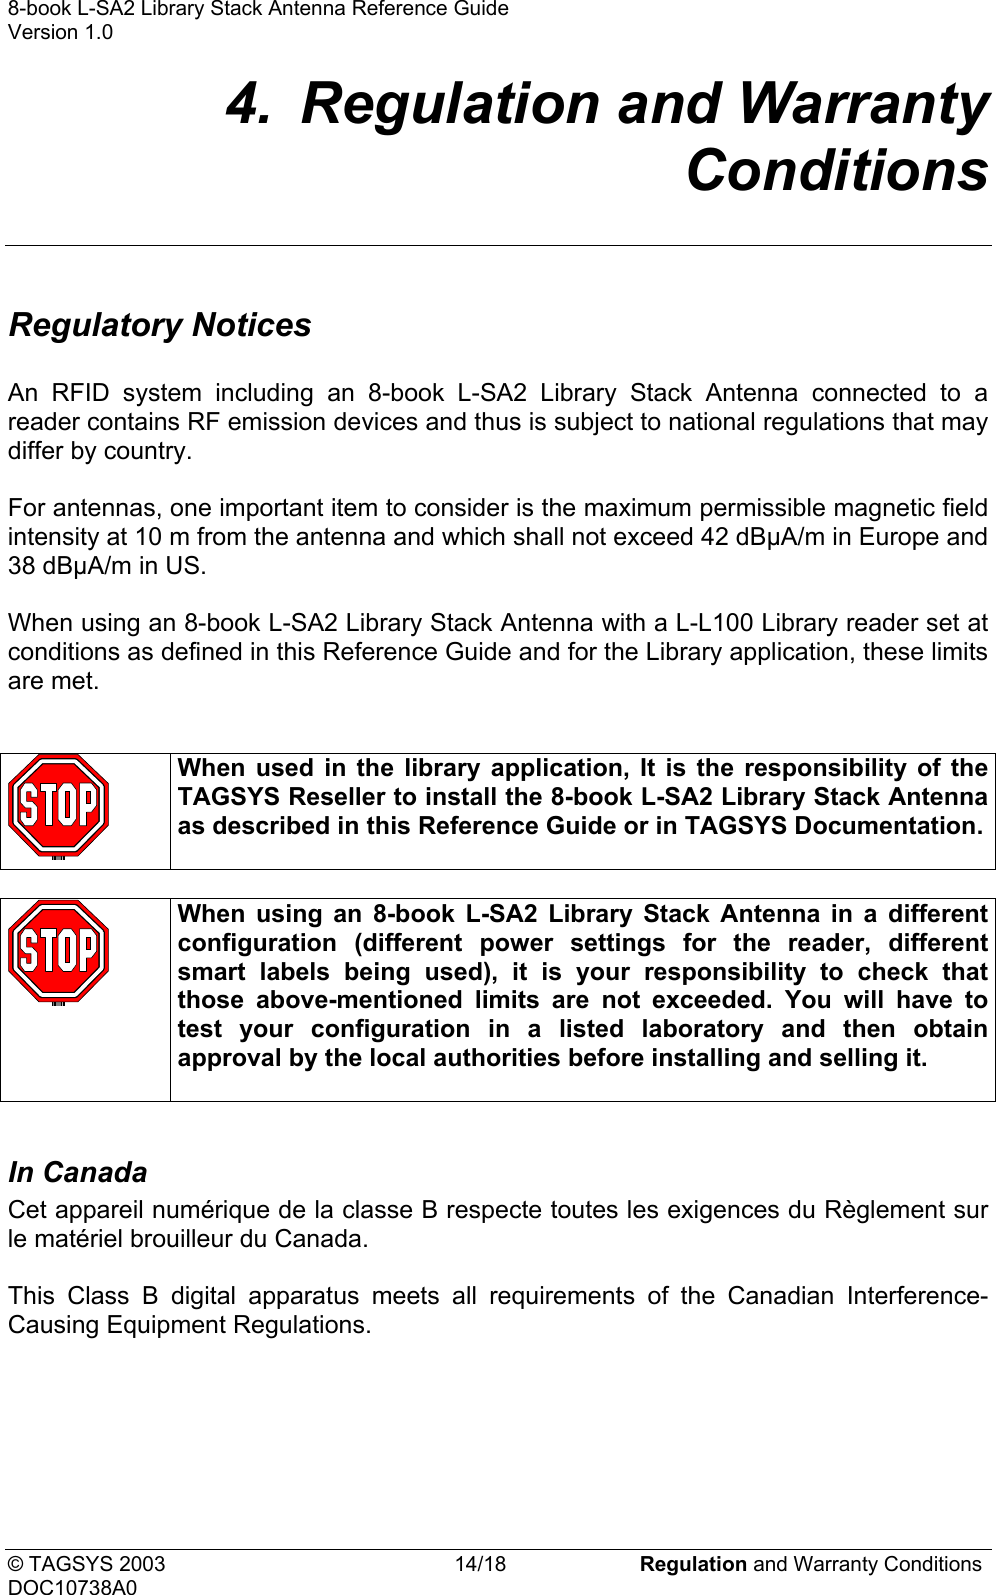 8-book L-SA2 Library Stack Antenna Reference Guide    Version 1.0 4.  Regulation and Warranty Conditions  Regulatory Notices  An RFID system including an 8-book L-SA2 Library Stack Antenna connected to a reader contains RF emission devices and thus is subject to national regulations that may differ by country.  For antennas, one important item to consider is the maximum permissible magnetic field intensity at 10 m from the antenna and which shall not exceed 42 dBµA/m in Europe and 38 dBµA/m in US.  When using an 8-book L-SA2 Library Stack Antenna with a L-L100 Library reader set at conditions as defined in this Reference Guide and for the Library application, these limits are met.    When used in the library application, It is the responsibility of the TAGSYS Reseller to install the 8-book L-SA2 Library Stack Antenna as described in this Reference Guide or in TAGSYS Documentation.    When using an 8-book L-SA2 Library Stack Antenna in a different configuration (different power settings for the reader, different smart labels being used), it is your responsibility to check that those above-mentioned limits are not exceeded. You will have to test your configuration in a listed laboratory and then obtain approval by the local authorities before installing and selling it.   In Canada   Cet appareil numérique de la classe B respecte toutes les exigences du Règlement sur le matériel brouilleur du Canada.  This Class B digital apparatus meets all requirements of the Canadian Interference-Causing Equipment Regulations.  © TAGSYS 2003  14/18  Regulation and Warranty Conditions DOC10738A0 